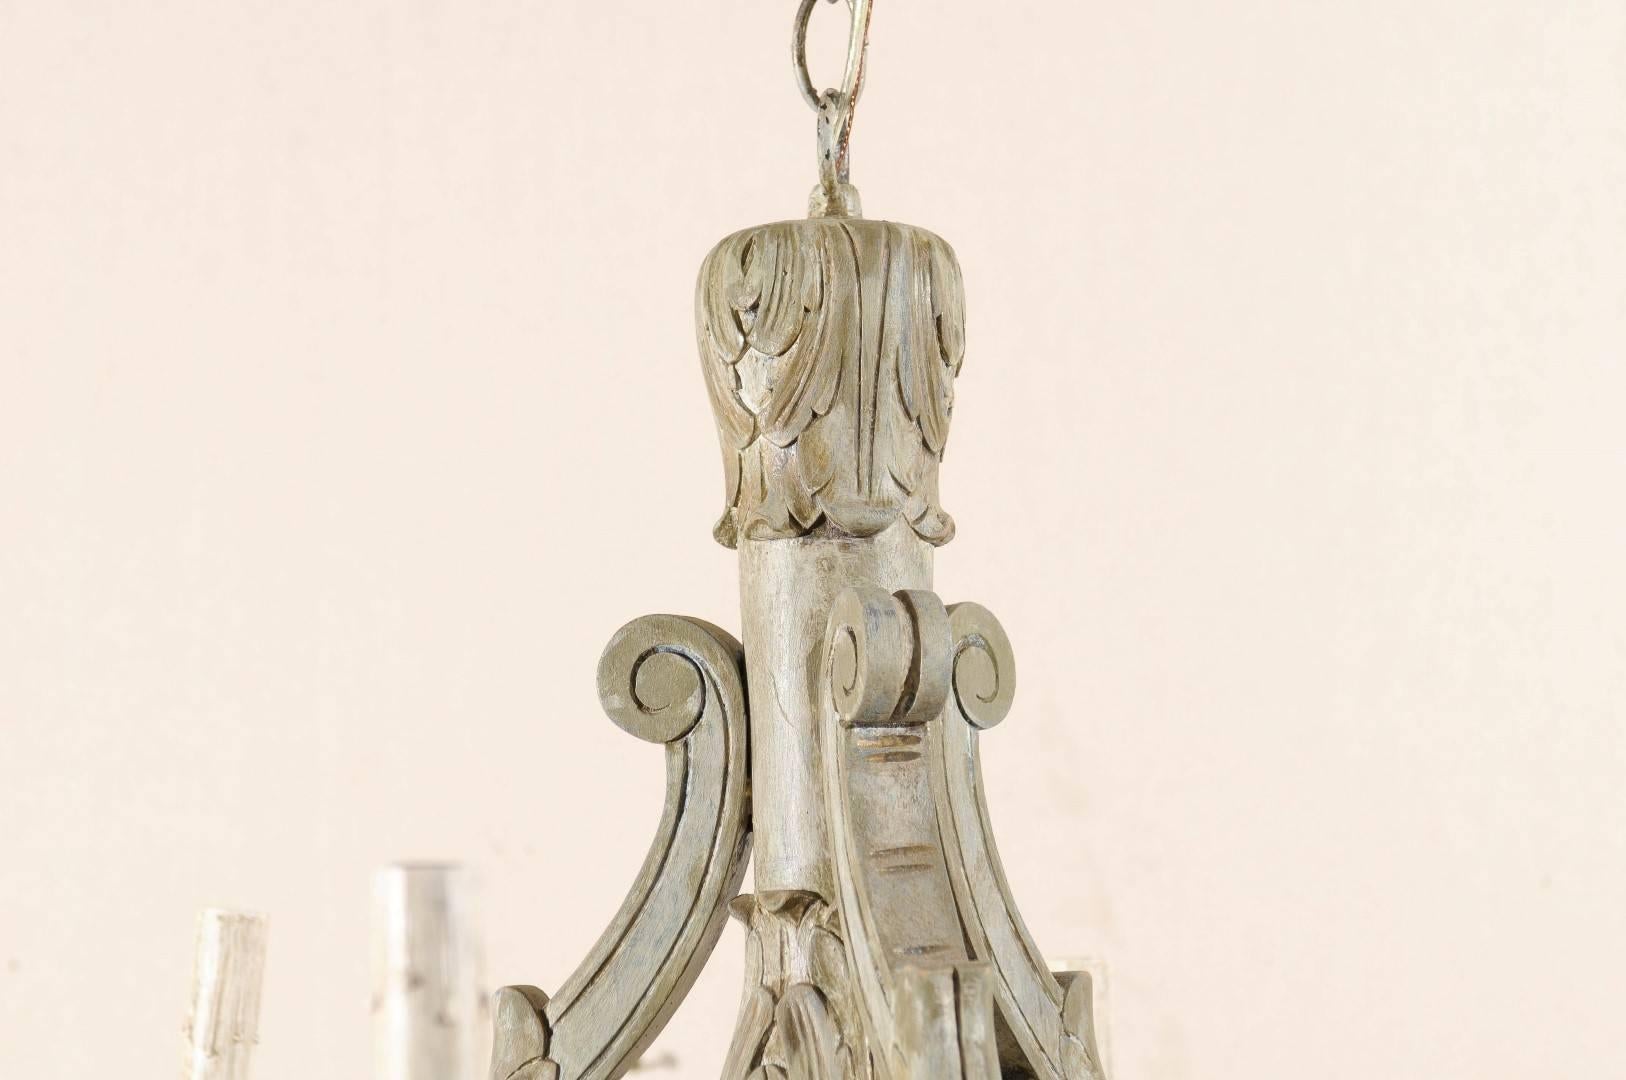 20th Century French Vintage Six-Light Wood Chandelier with Ornate Carvings and Scroll Arms